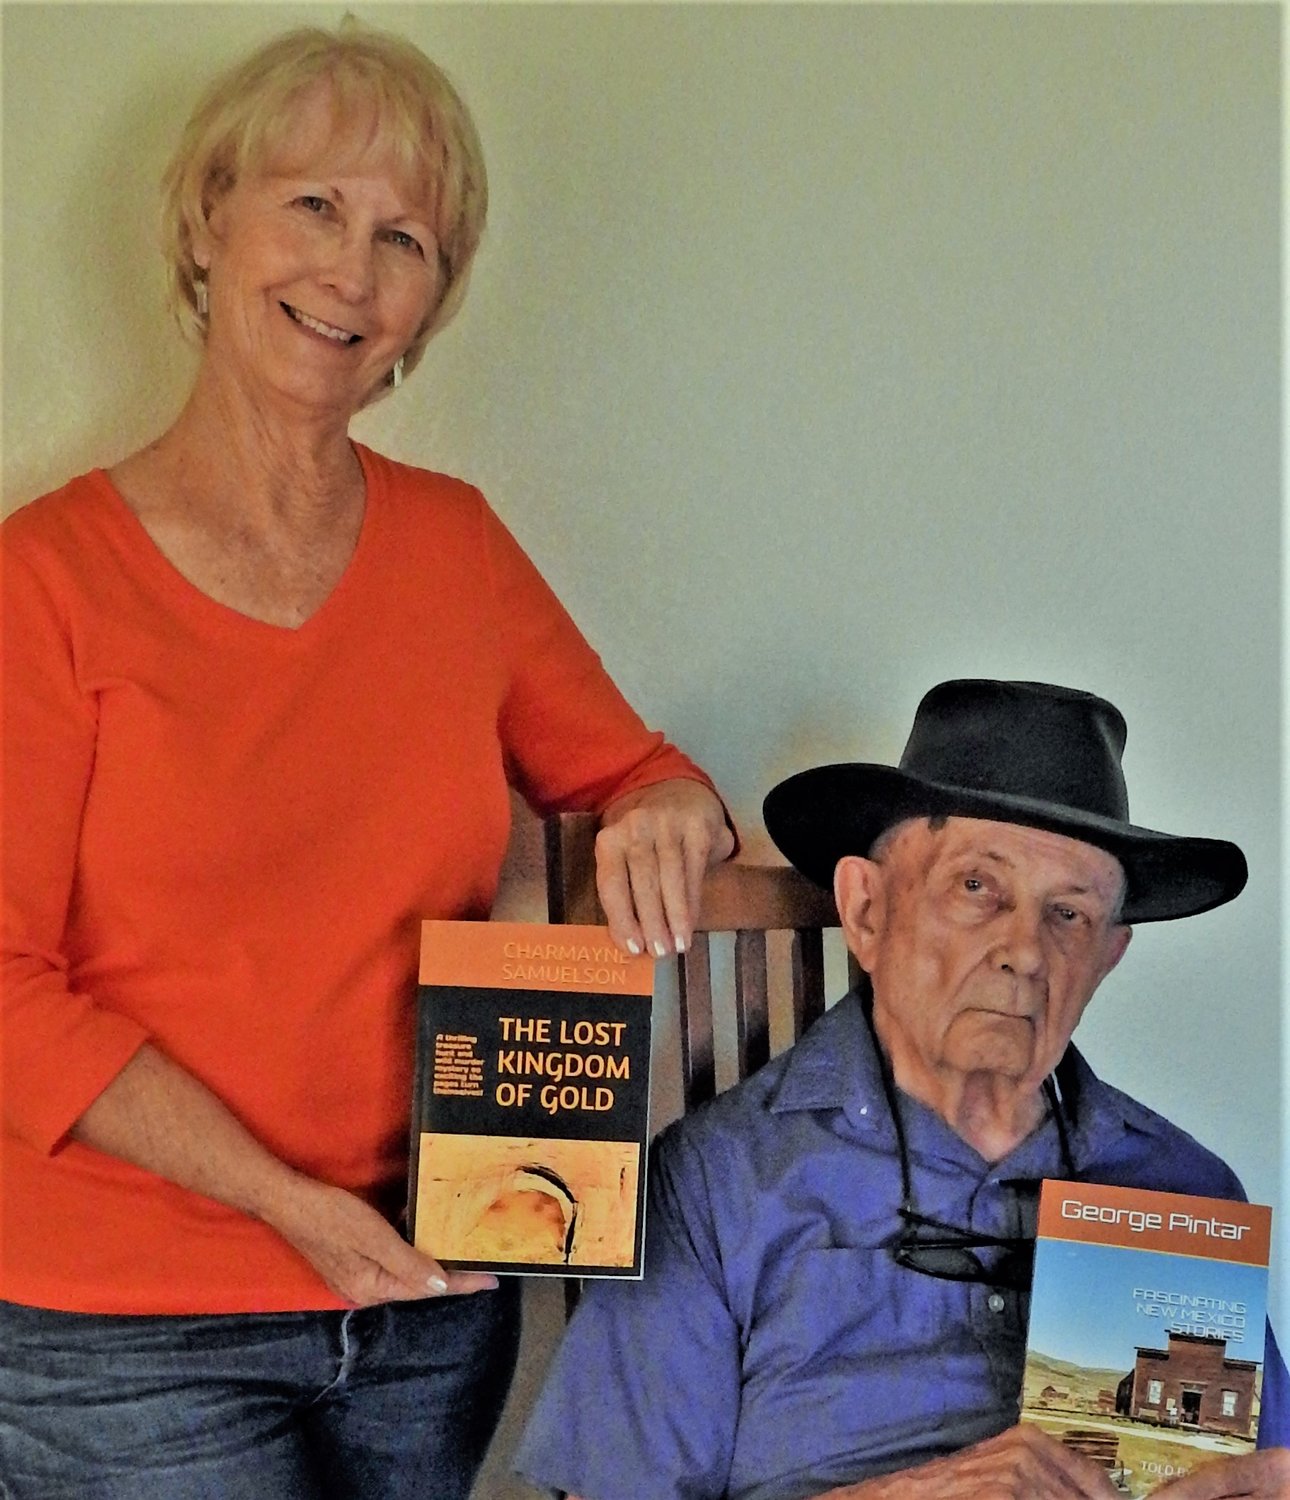 Las Cruces Writers Group members and authors George Pintar and Charmayne Samuelson